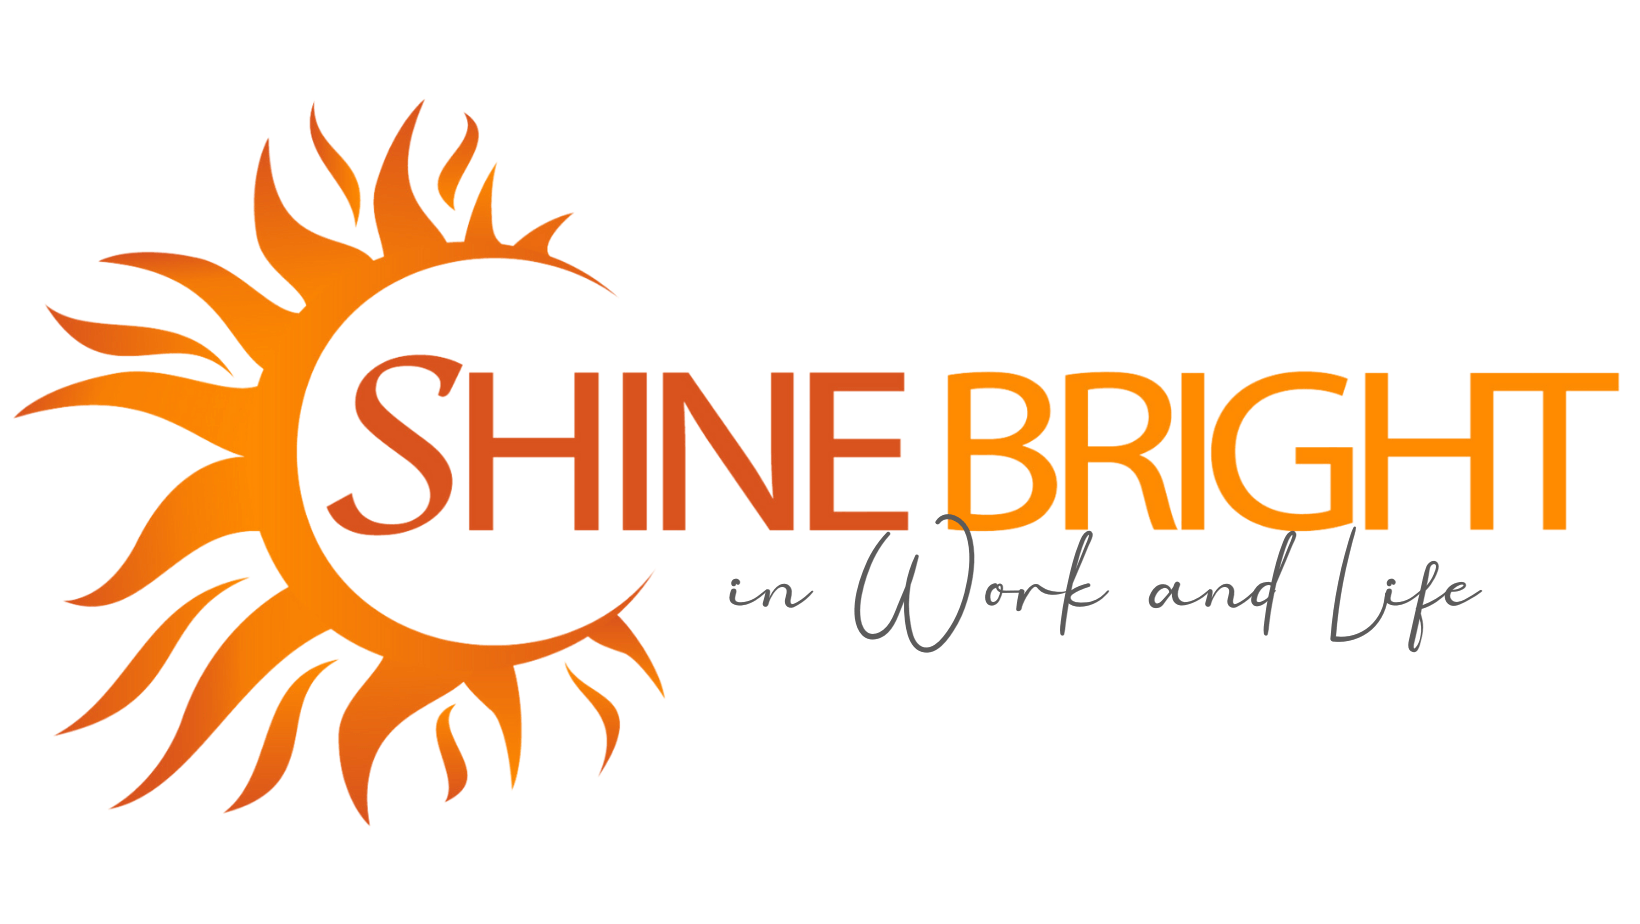 Shine Bright in Work and life